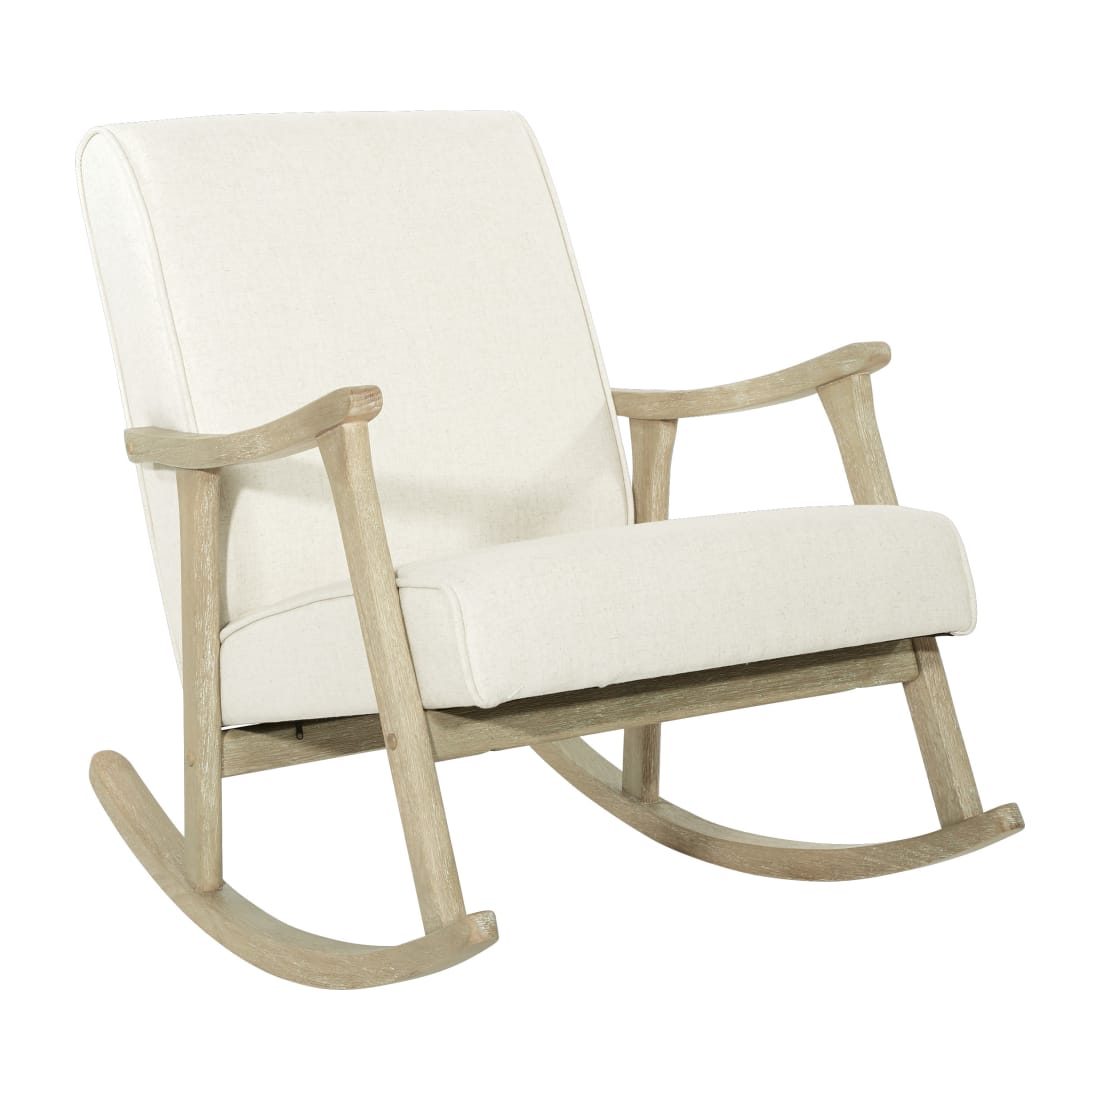 Gainsborough Rocker in Linen Fabric with Brushed Finish Base